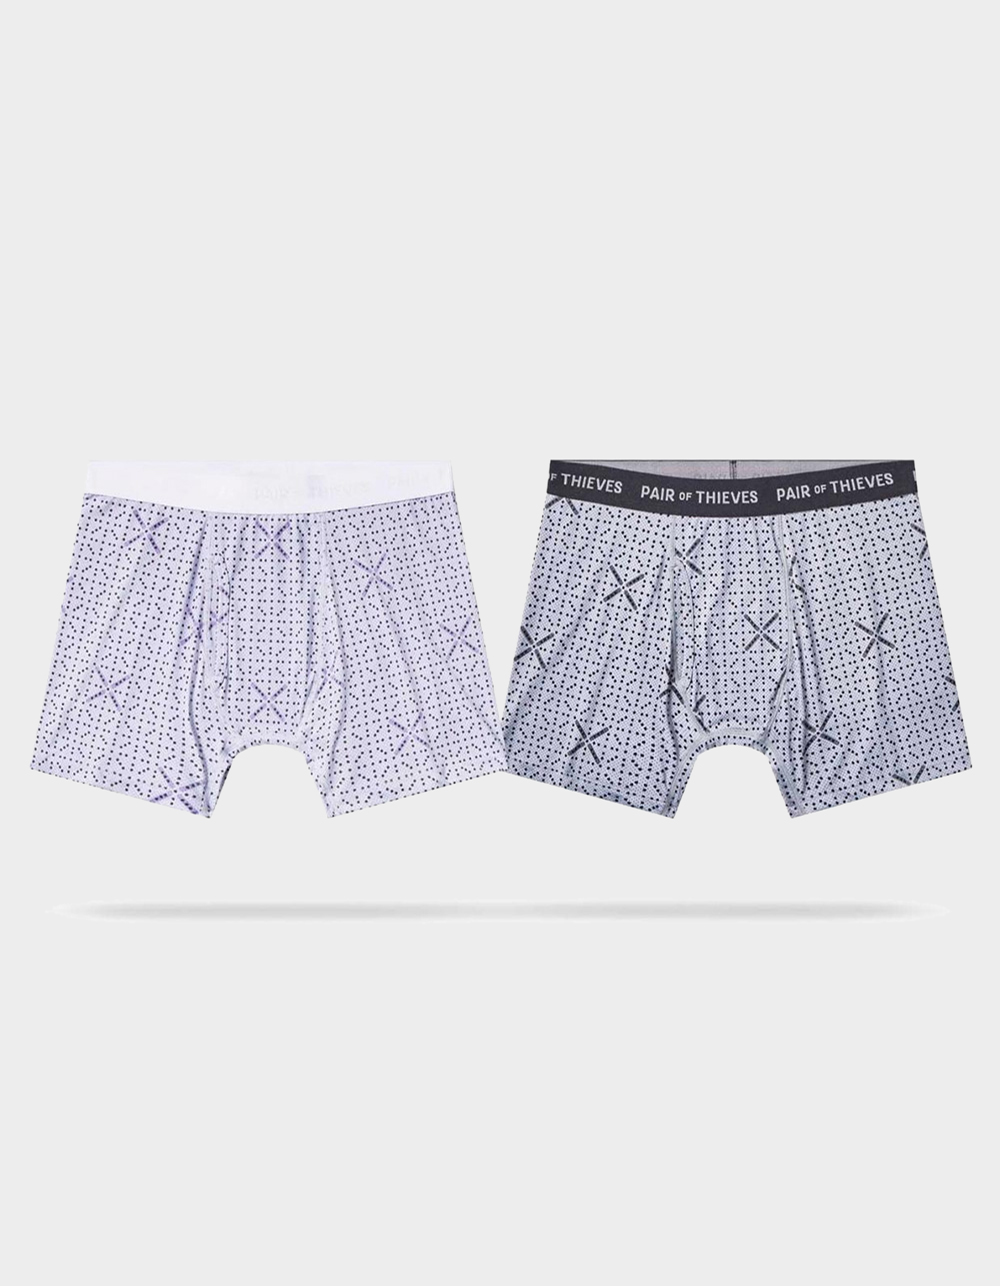 Pair Of Thieves Mens 3 Pack Super Fit Trunks